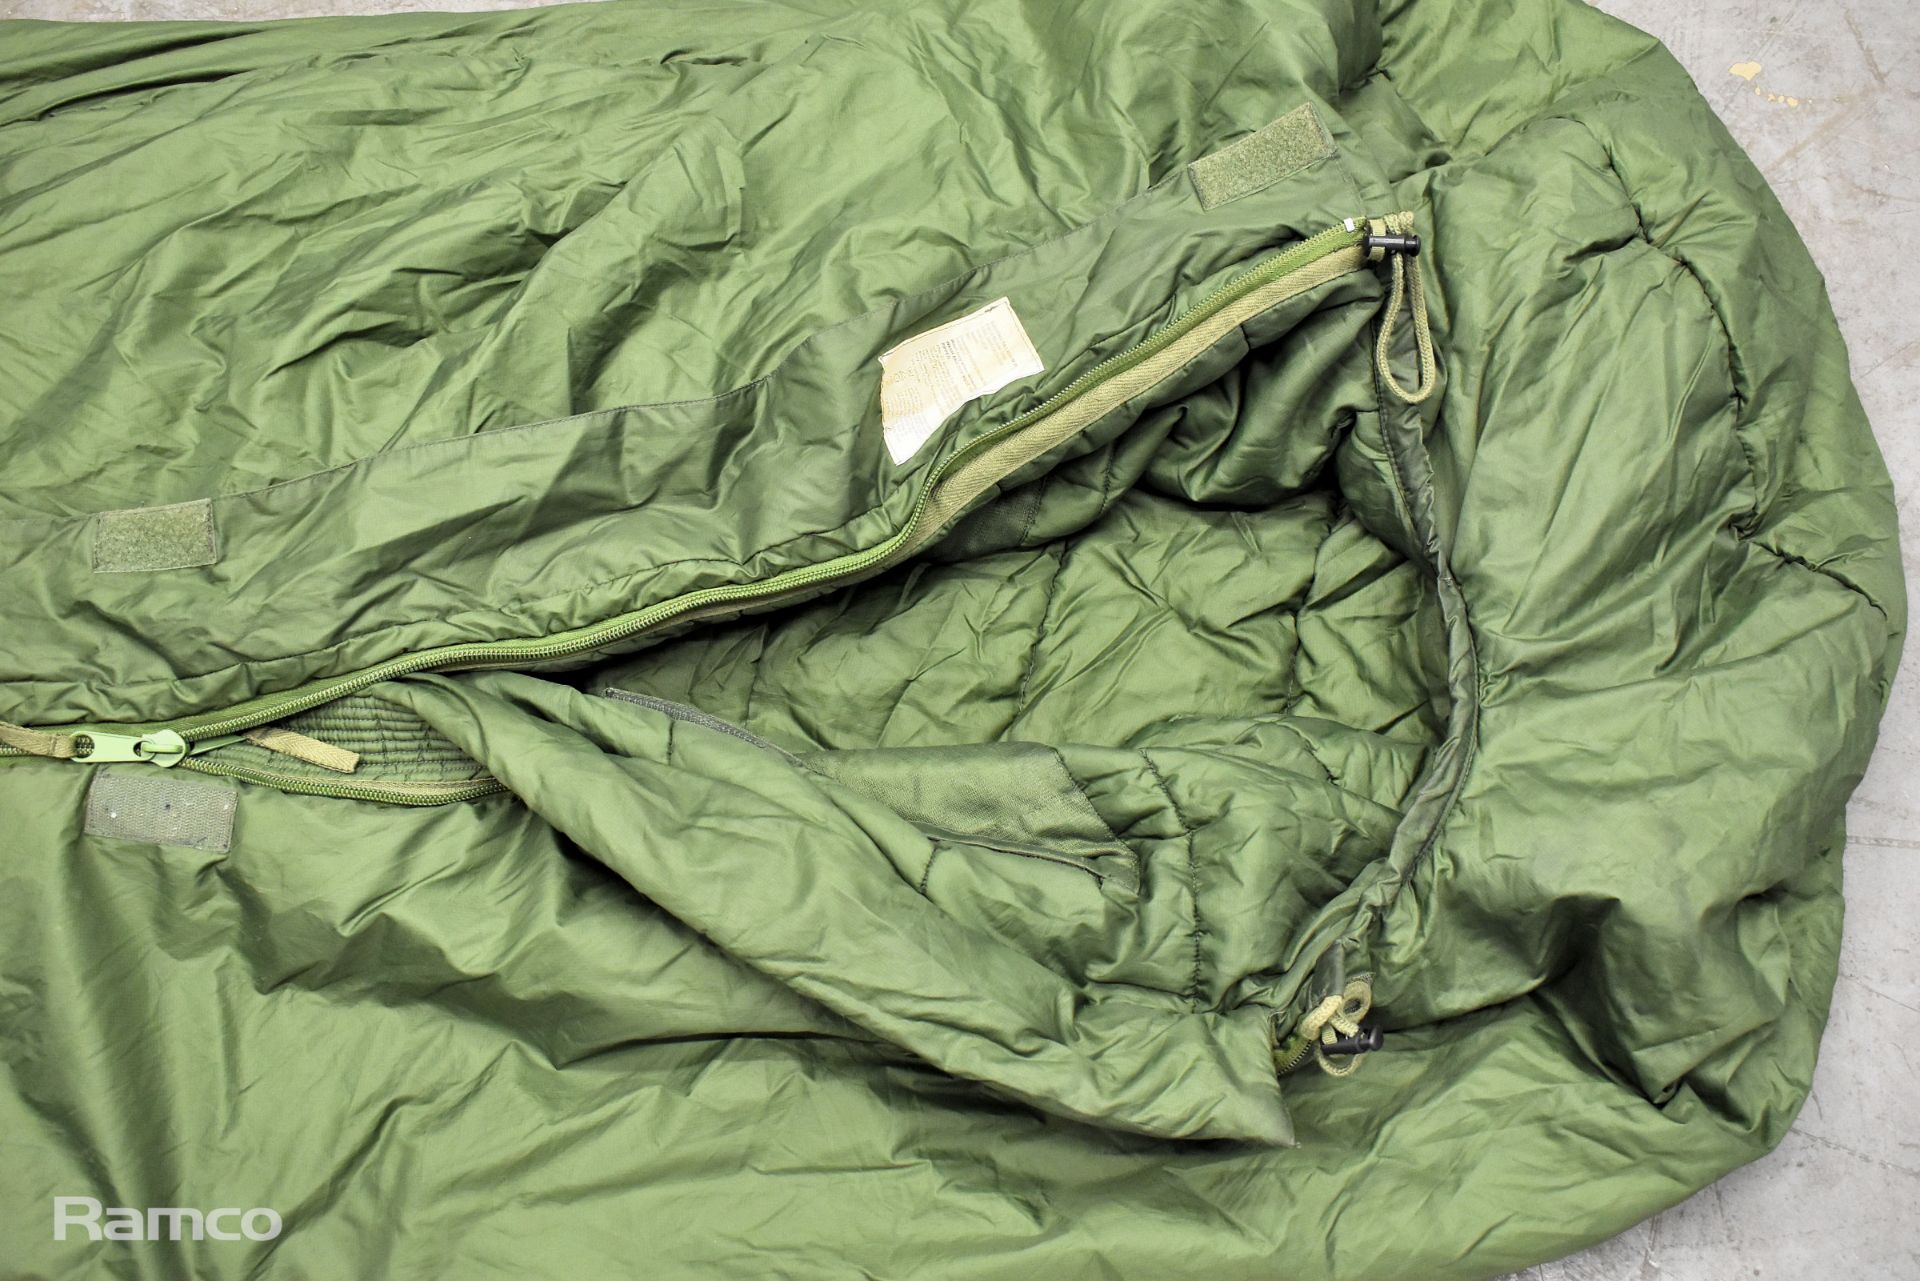 43x Sleeping bags - mixed grades and sizes - Image 8 of 8